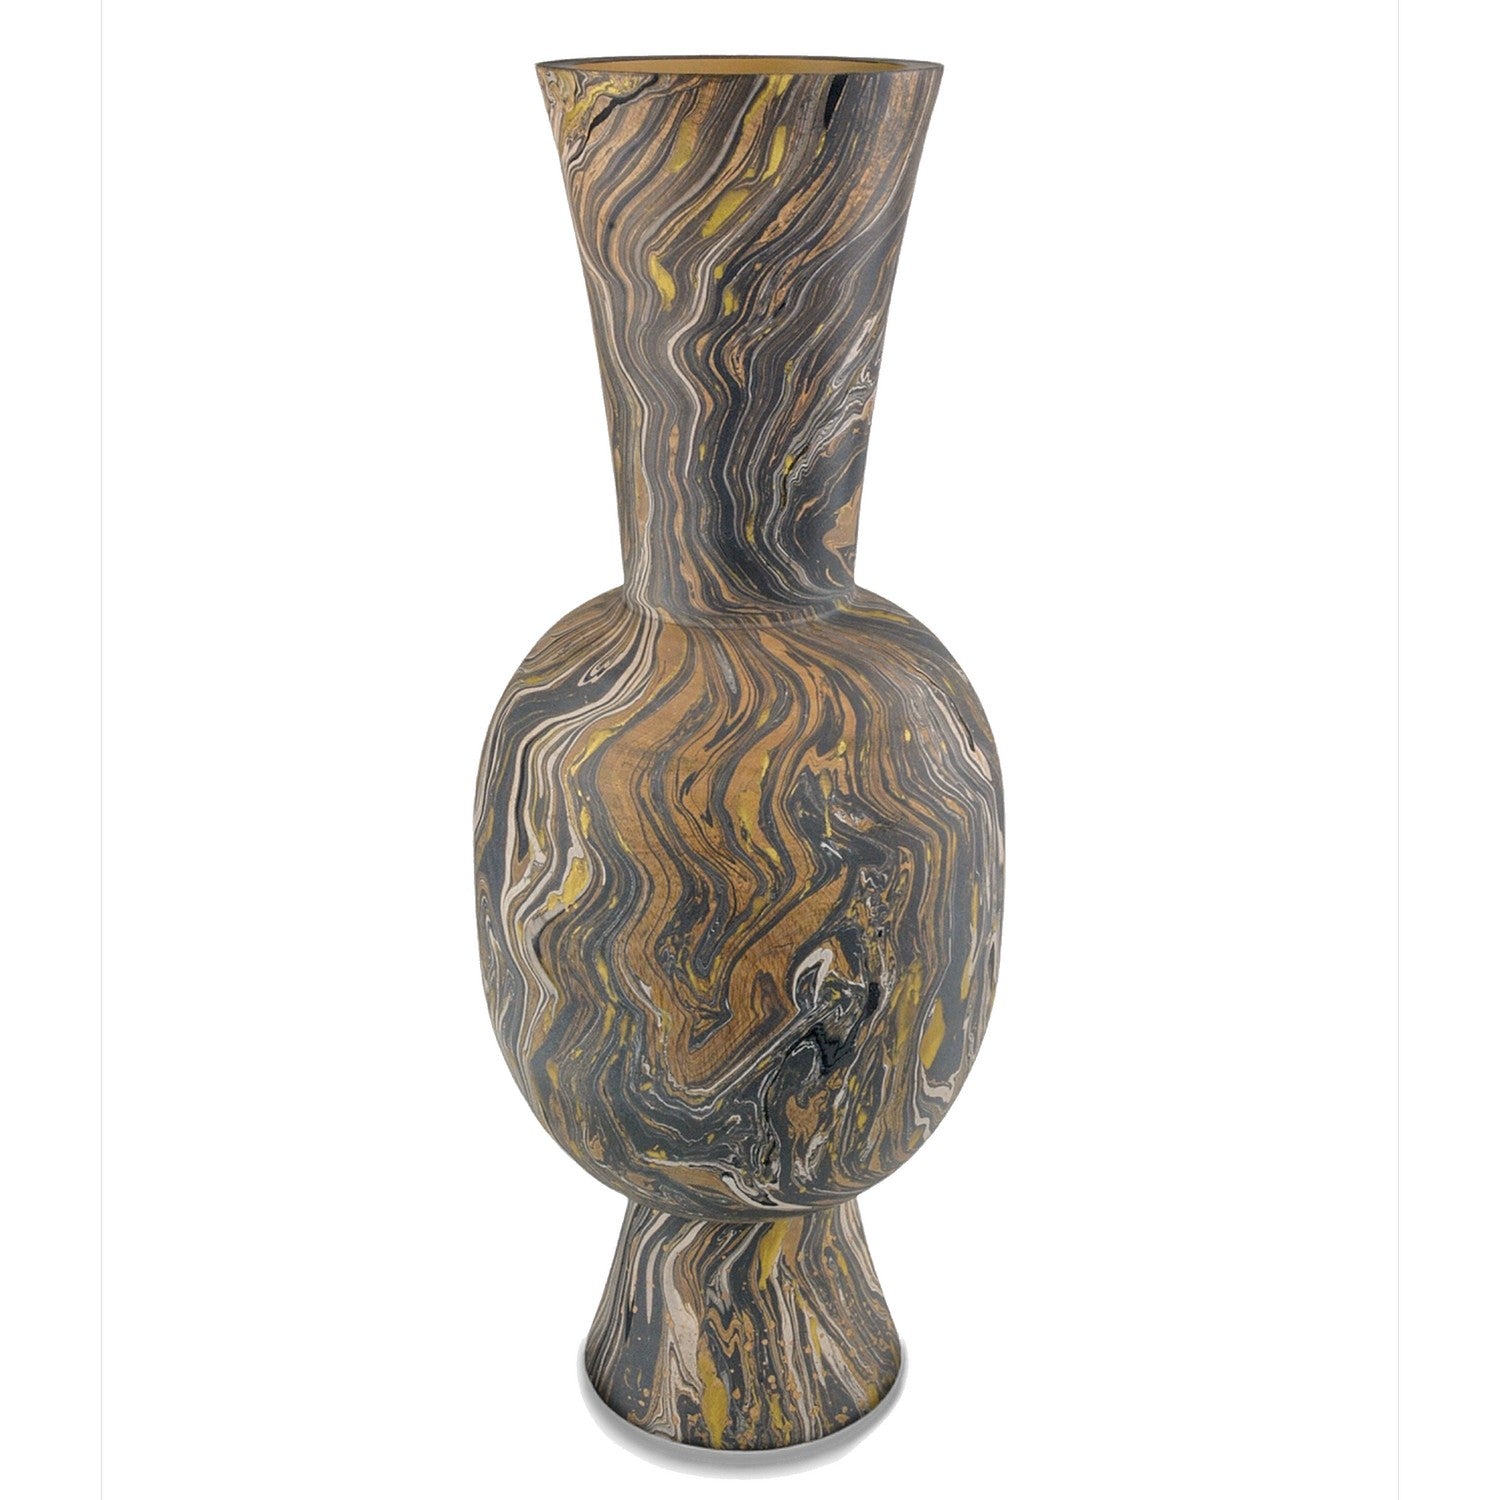 Currey and Company - 1200-0731 - Vase - Black/Brown/White/Gold